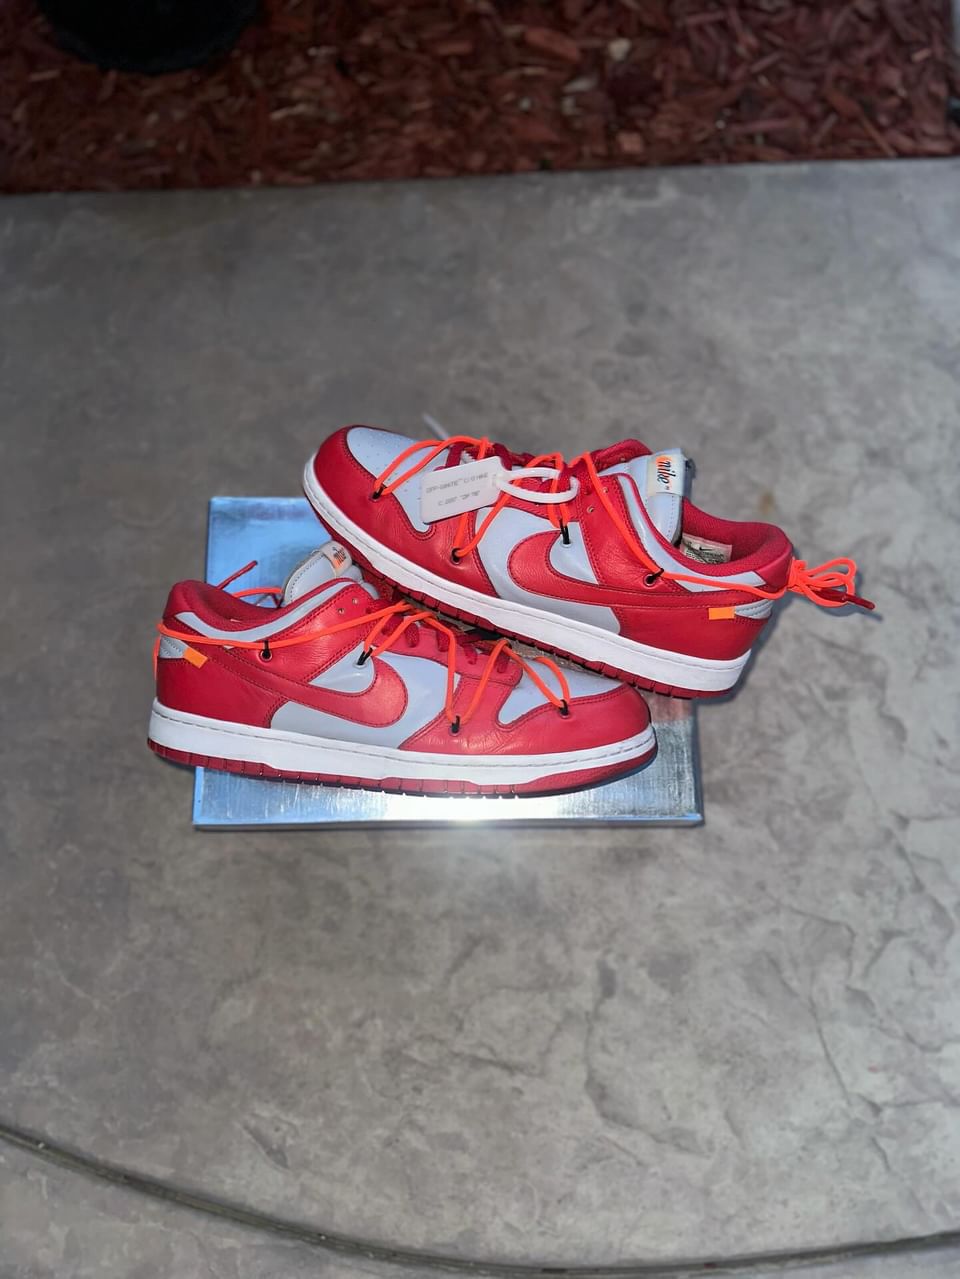 Off-White University Red Dunks size 12